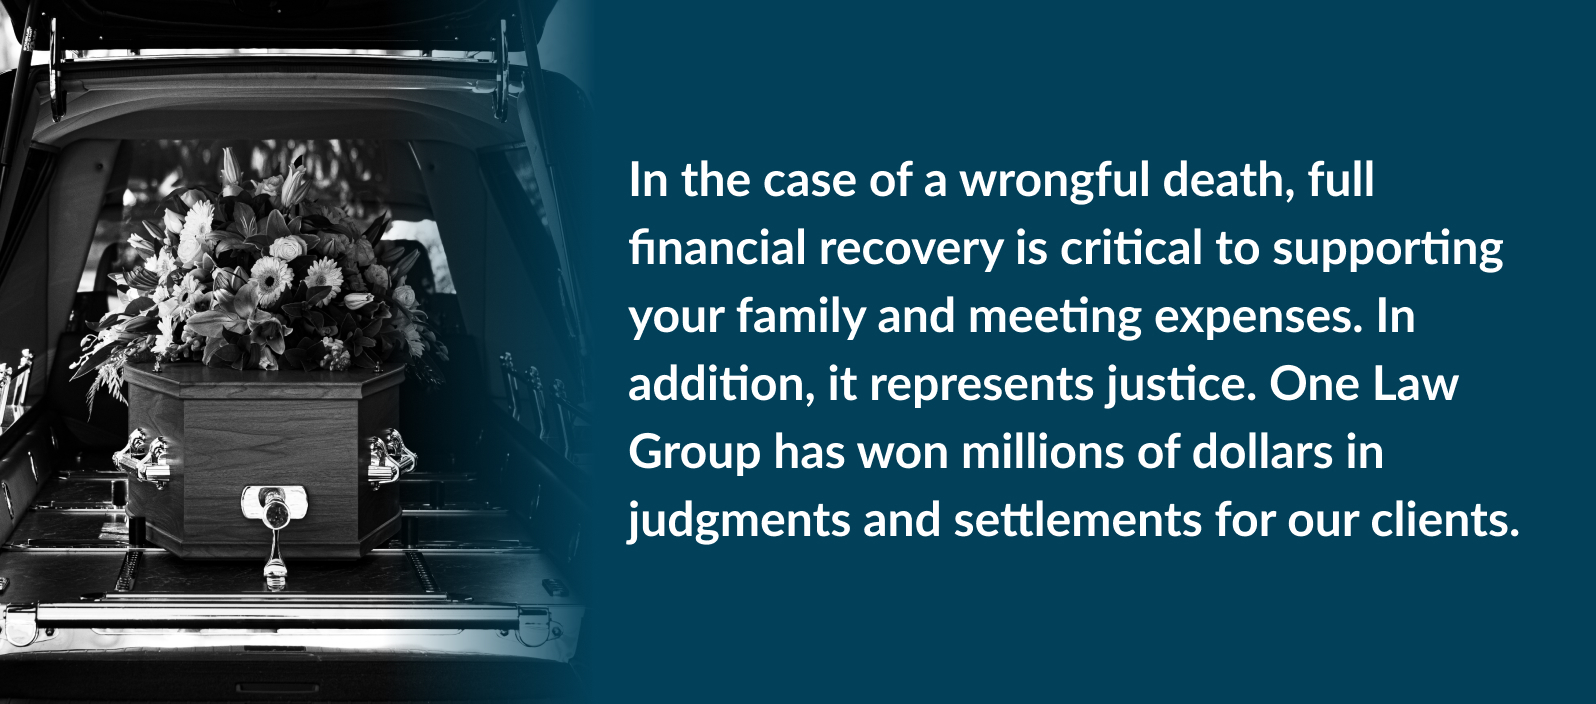 Millions Won for Wrongful Death Clients